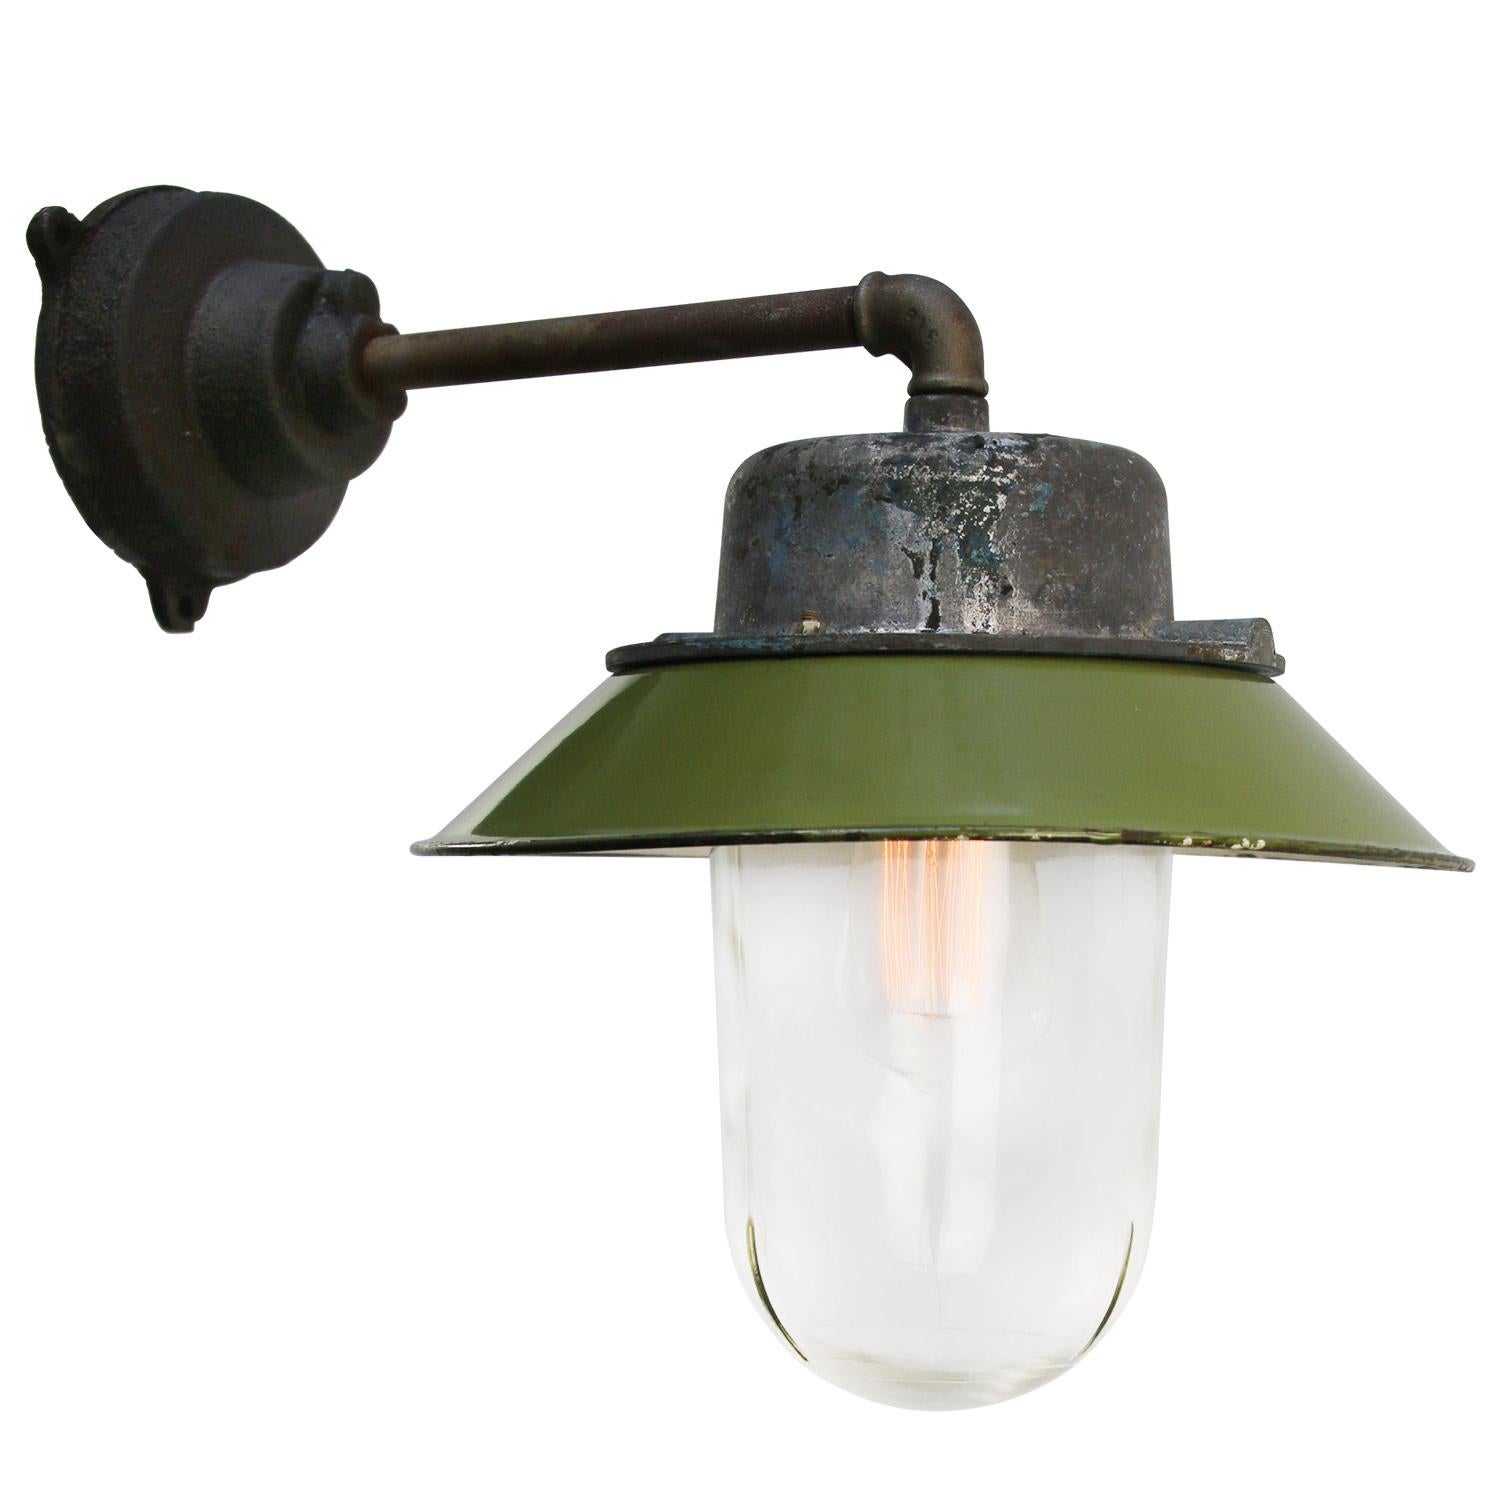 Green enamel industrial wall lamp with white interior.
Grey cast aluminium top, cast iron arm
Clear glass 

Diameter cast iron wall piece: 12 cm. Three holes to secure.

Weight: 4.00 kg / 8.8 lb

Priced per individual item. All lamps have